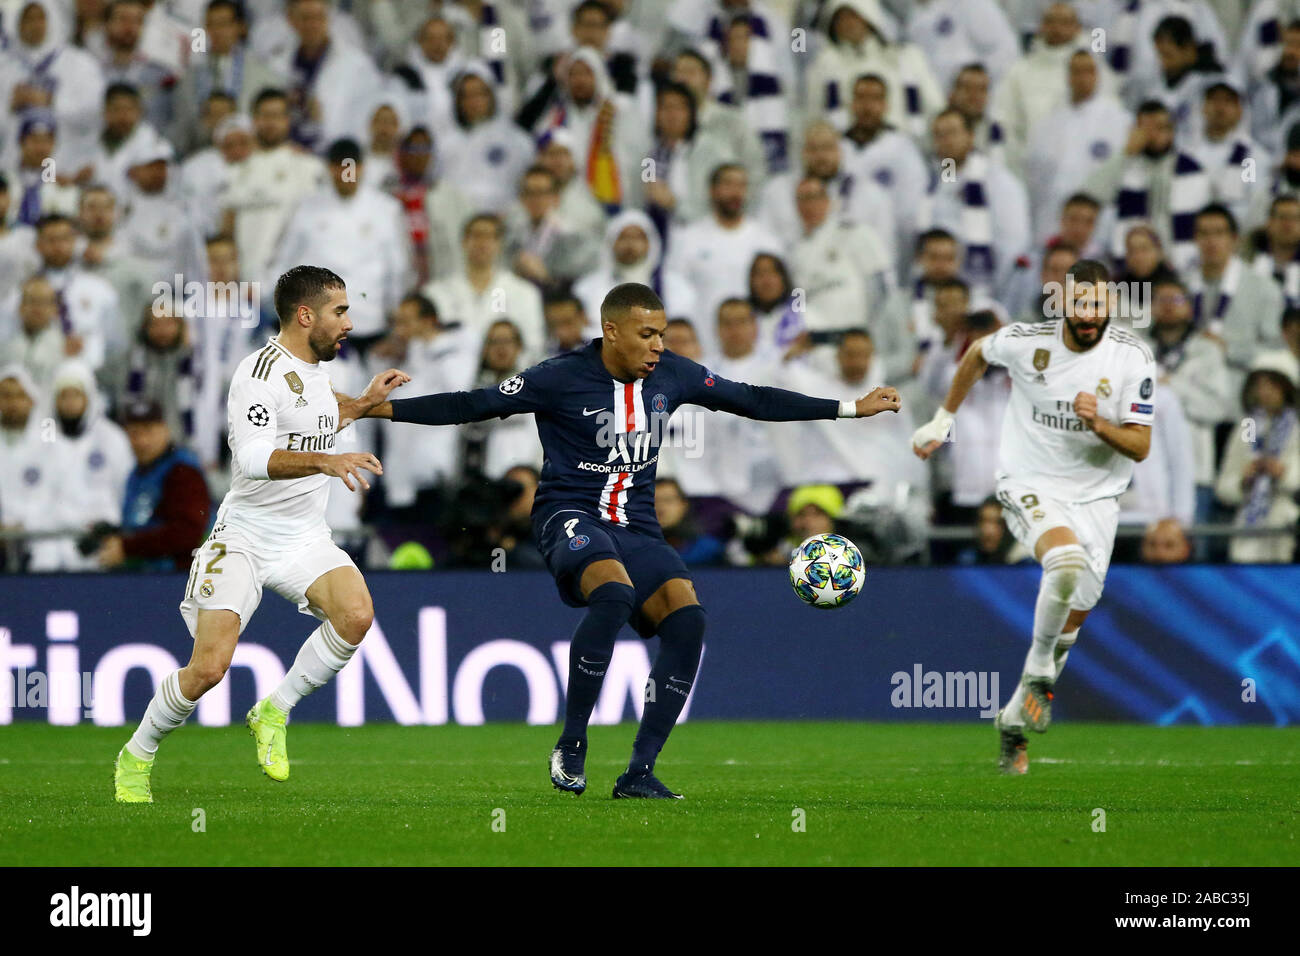 Madrid, Spain. 26th Nov, 2019. Real Madrid against PSG Champions League football group A match 5 held at the Santiago Bernabéu stadium in Madrid. Carvajal (L) and Karim Bemzema (R) Real Madrid players and Kylian Mbapee (C). Final score 2-2 Photo: Juan Carlos Rojas/Picture Alliance | usage worldwide Credit: dpa picture alliance/Alamy Live News Stock Photo